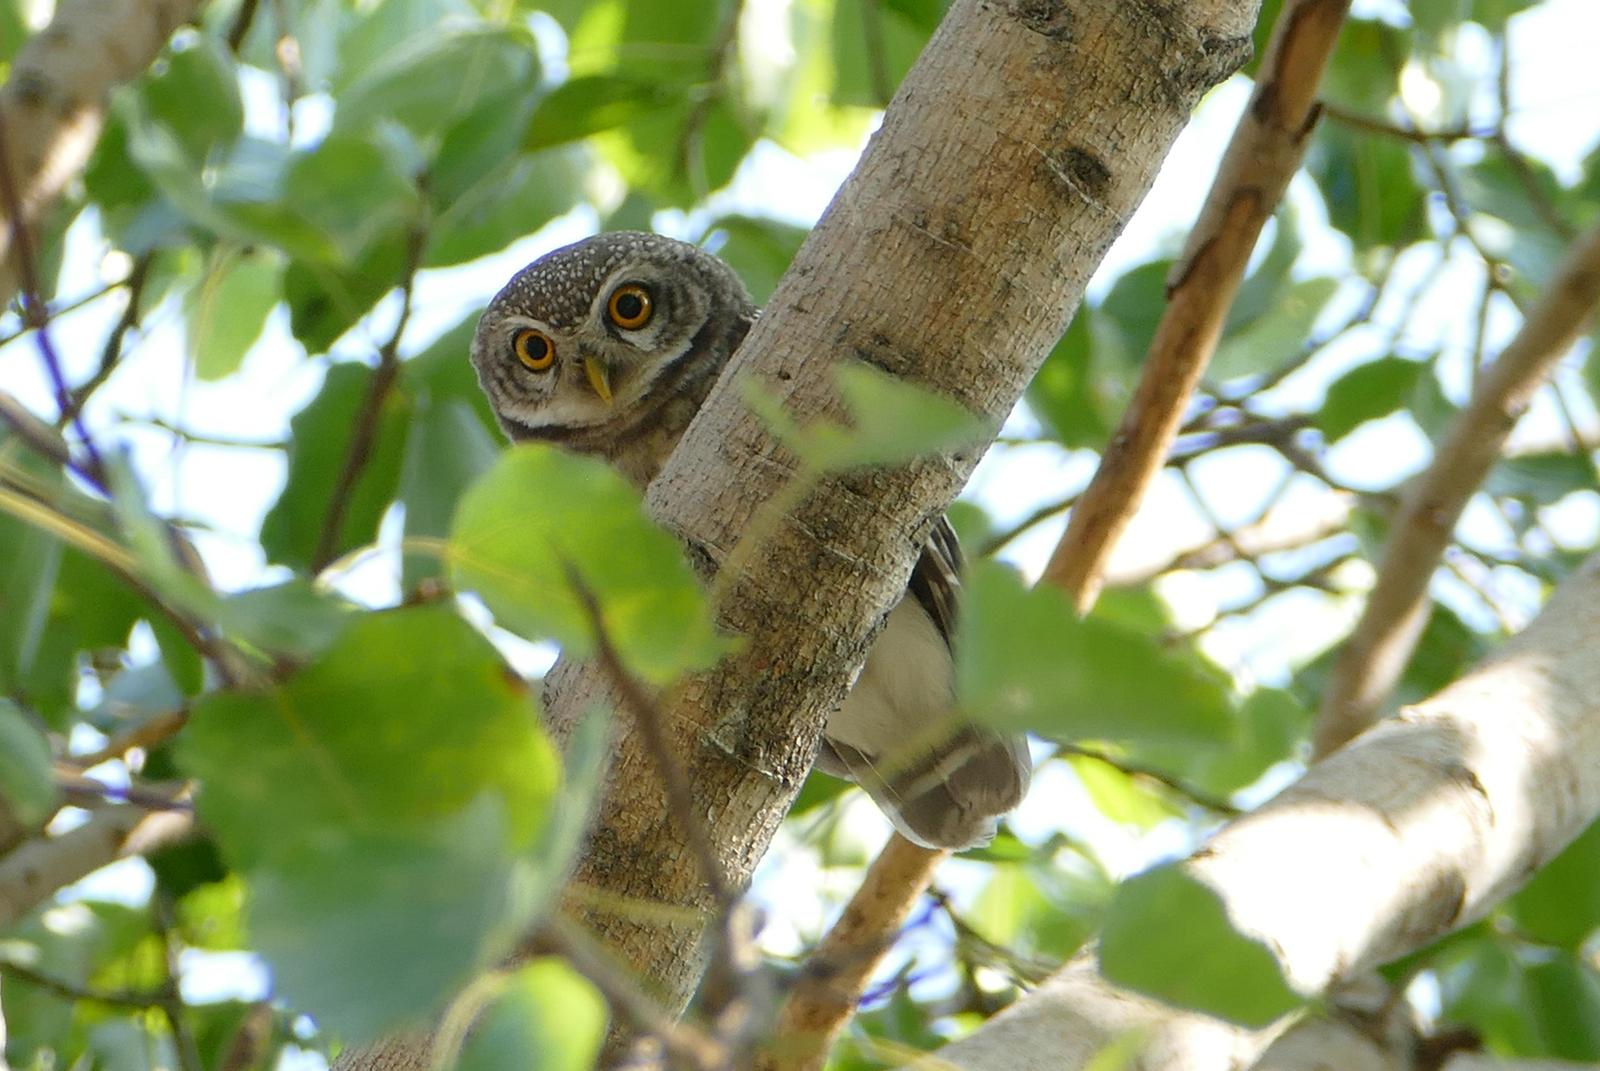 Spotted Owlet Photo by Randy Siebert